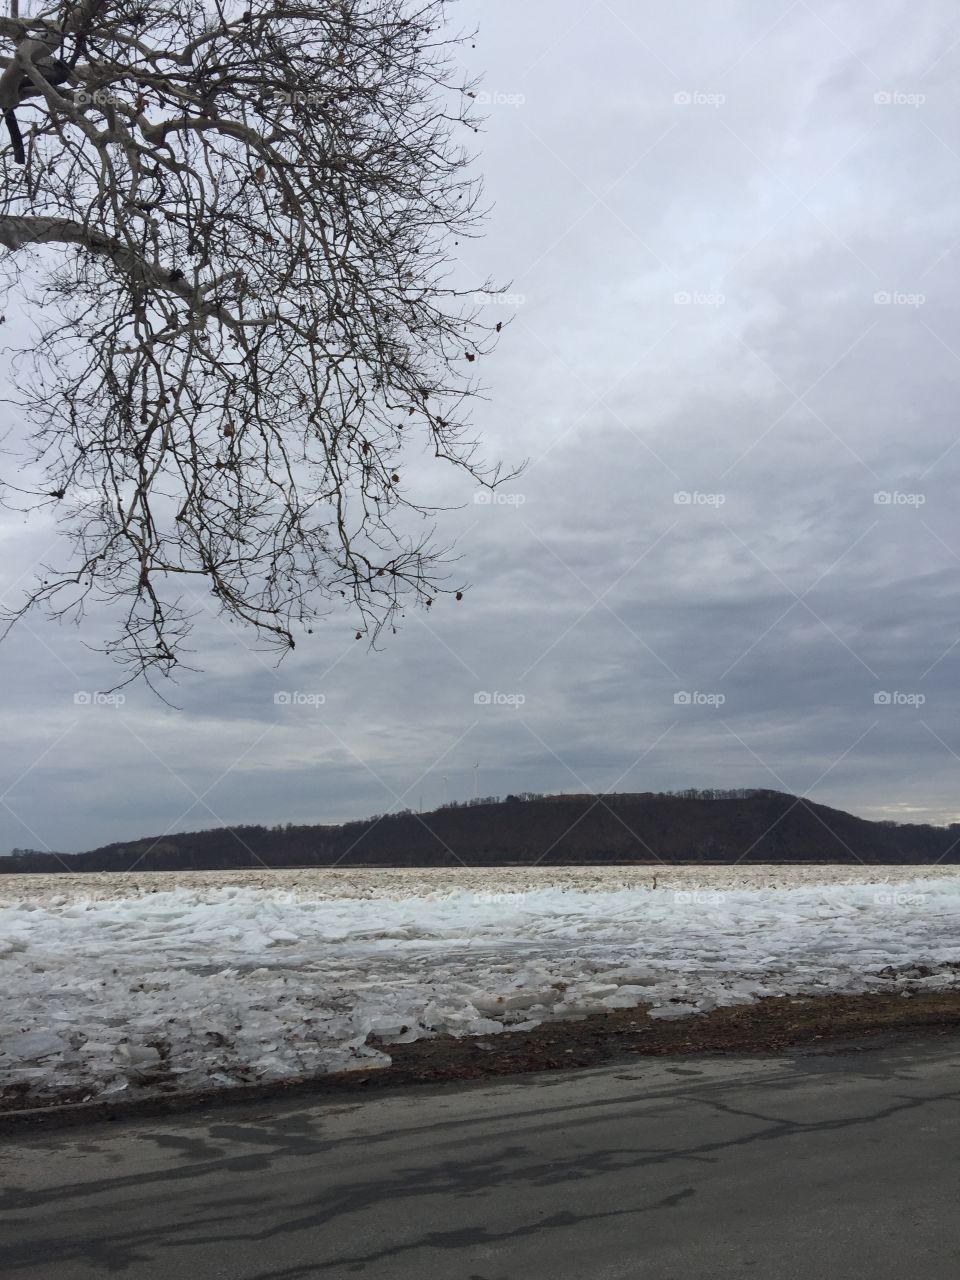 Ice jam on the Susquehanna in Log Level Wrightsville PA